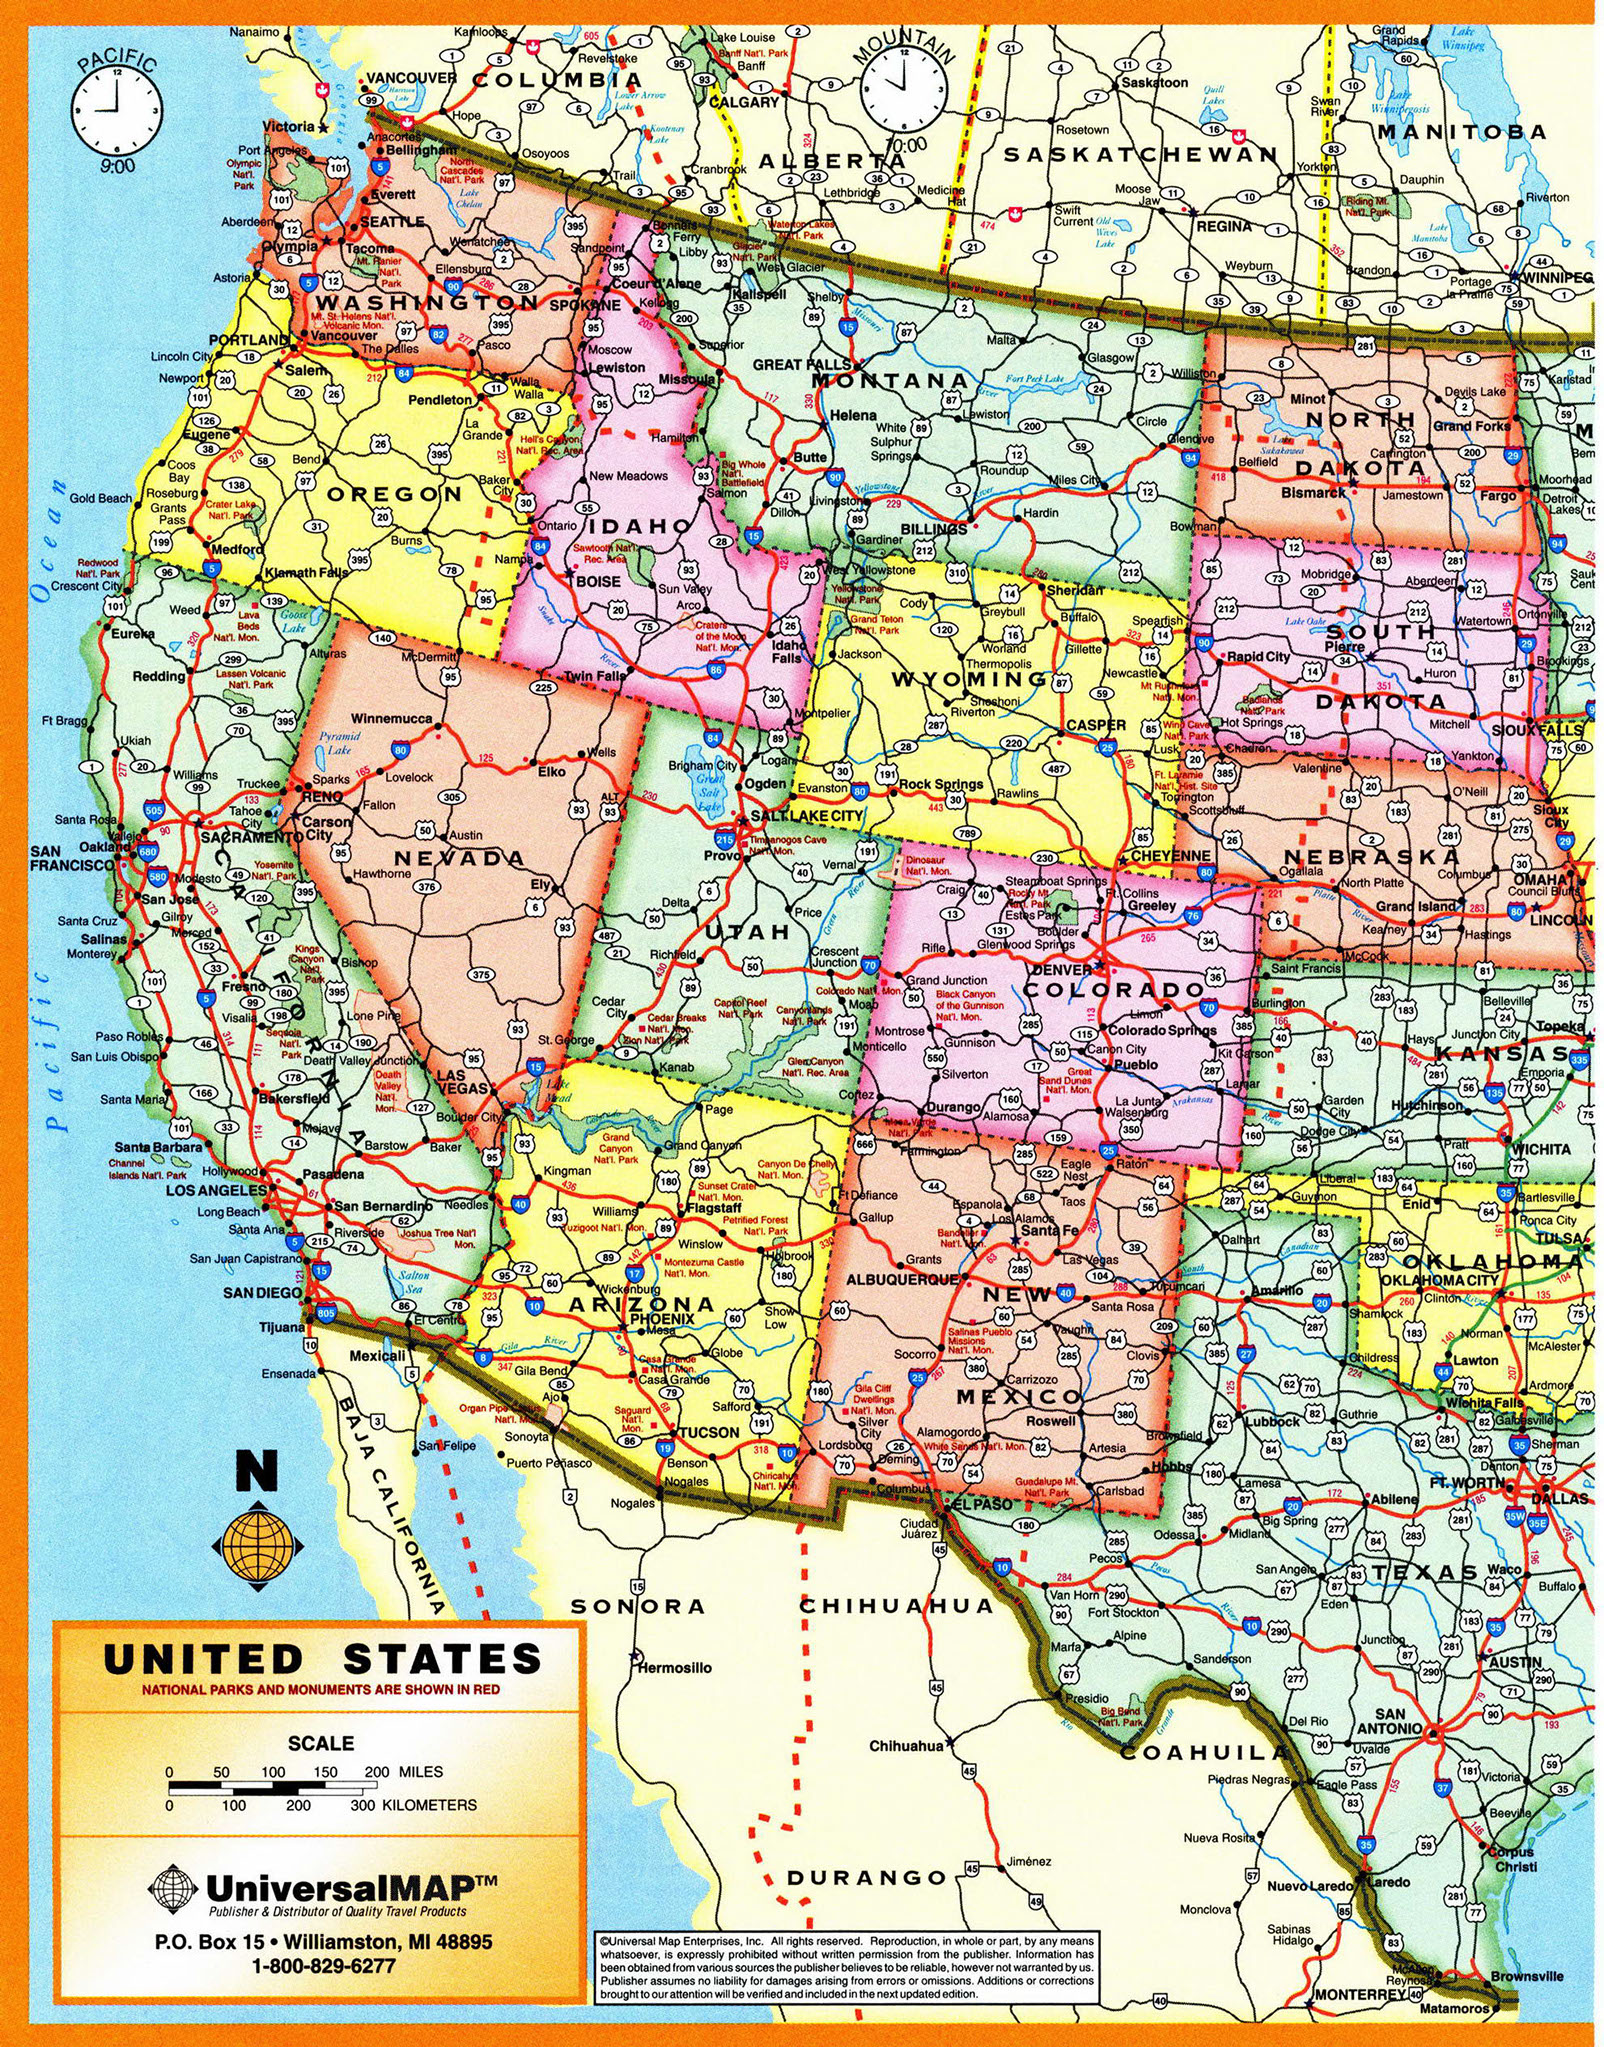 Detailed map of Time Zones of west half of USA.